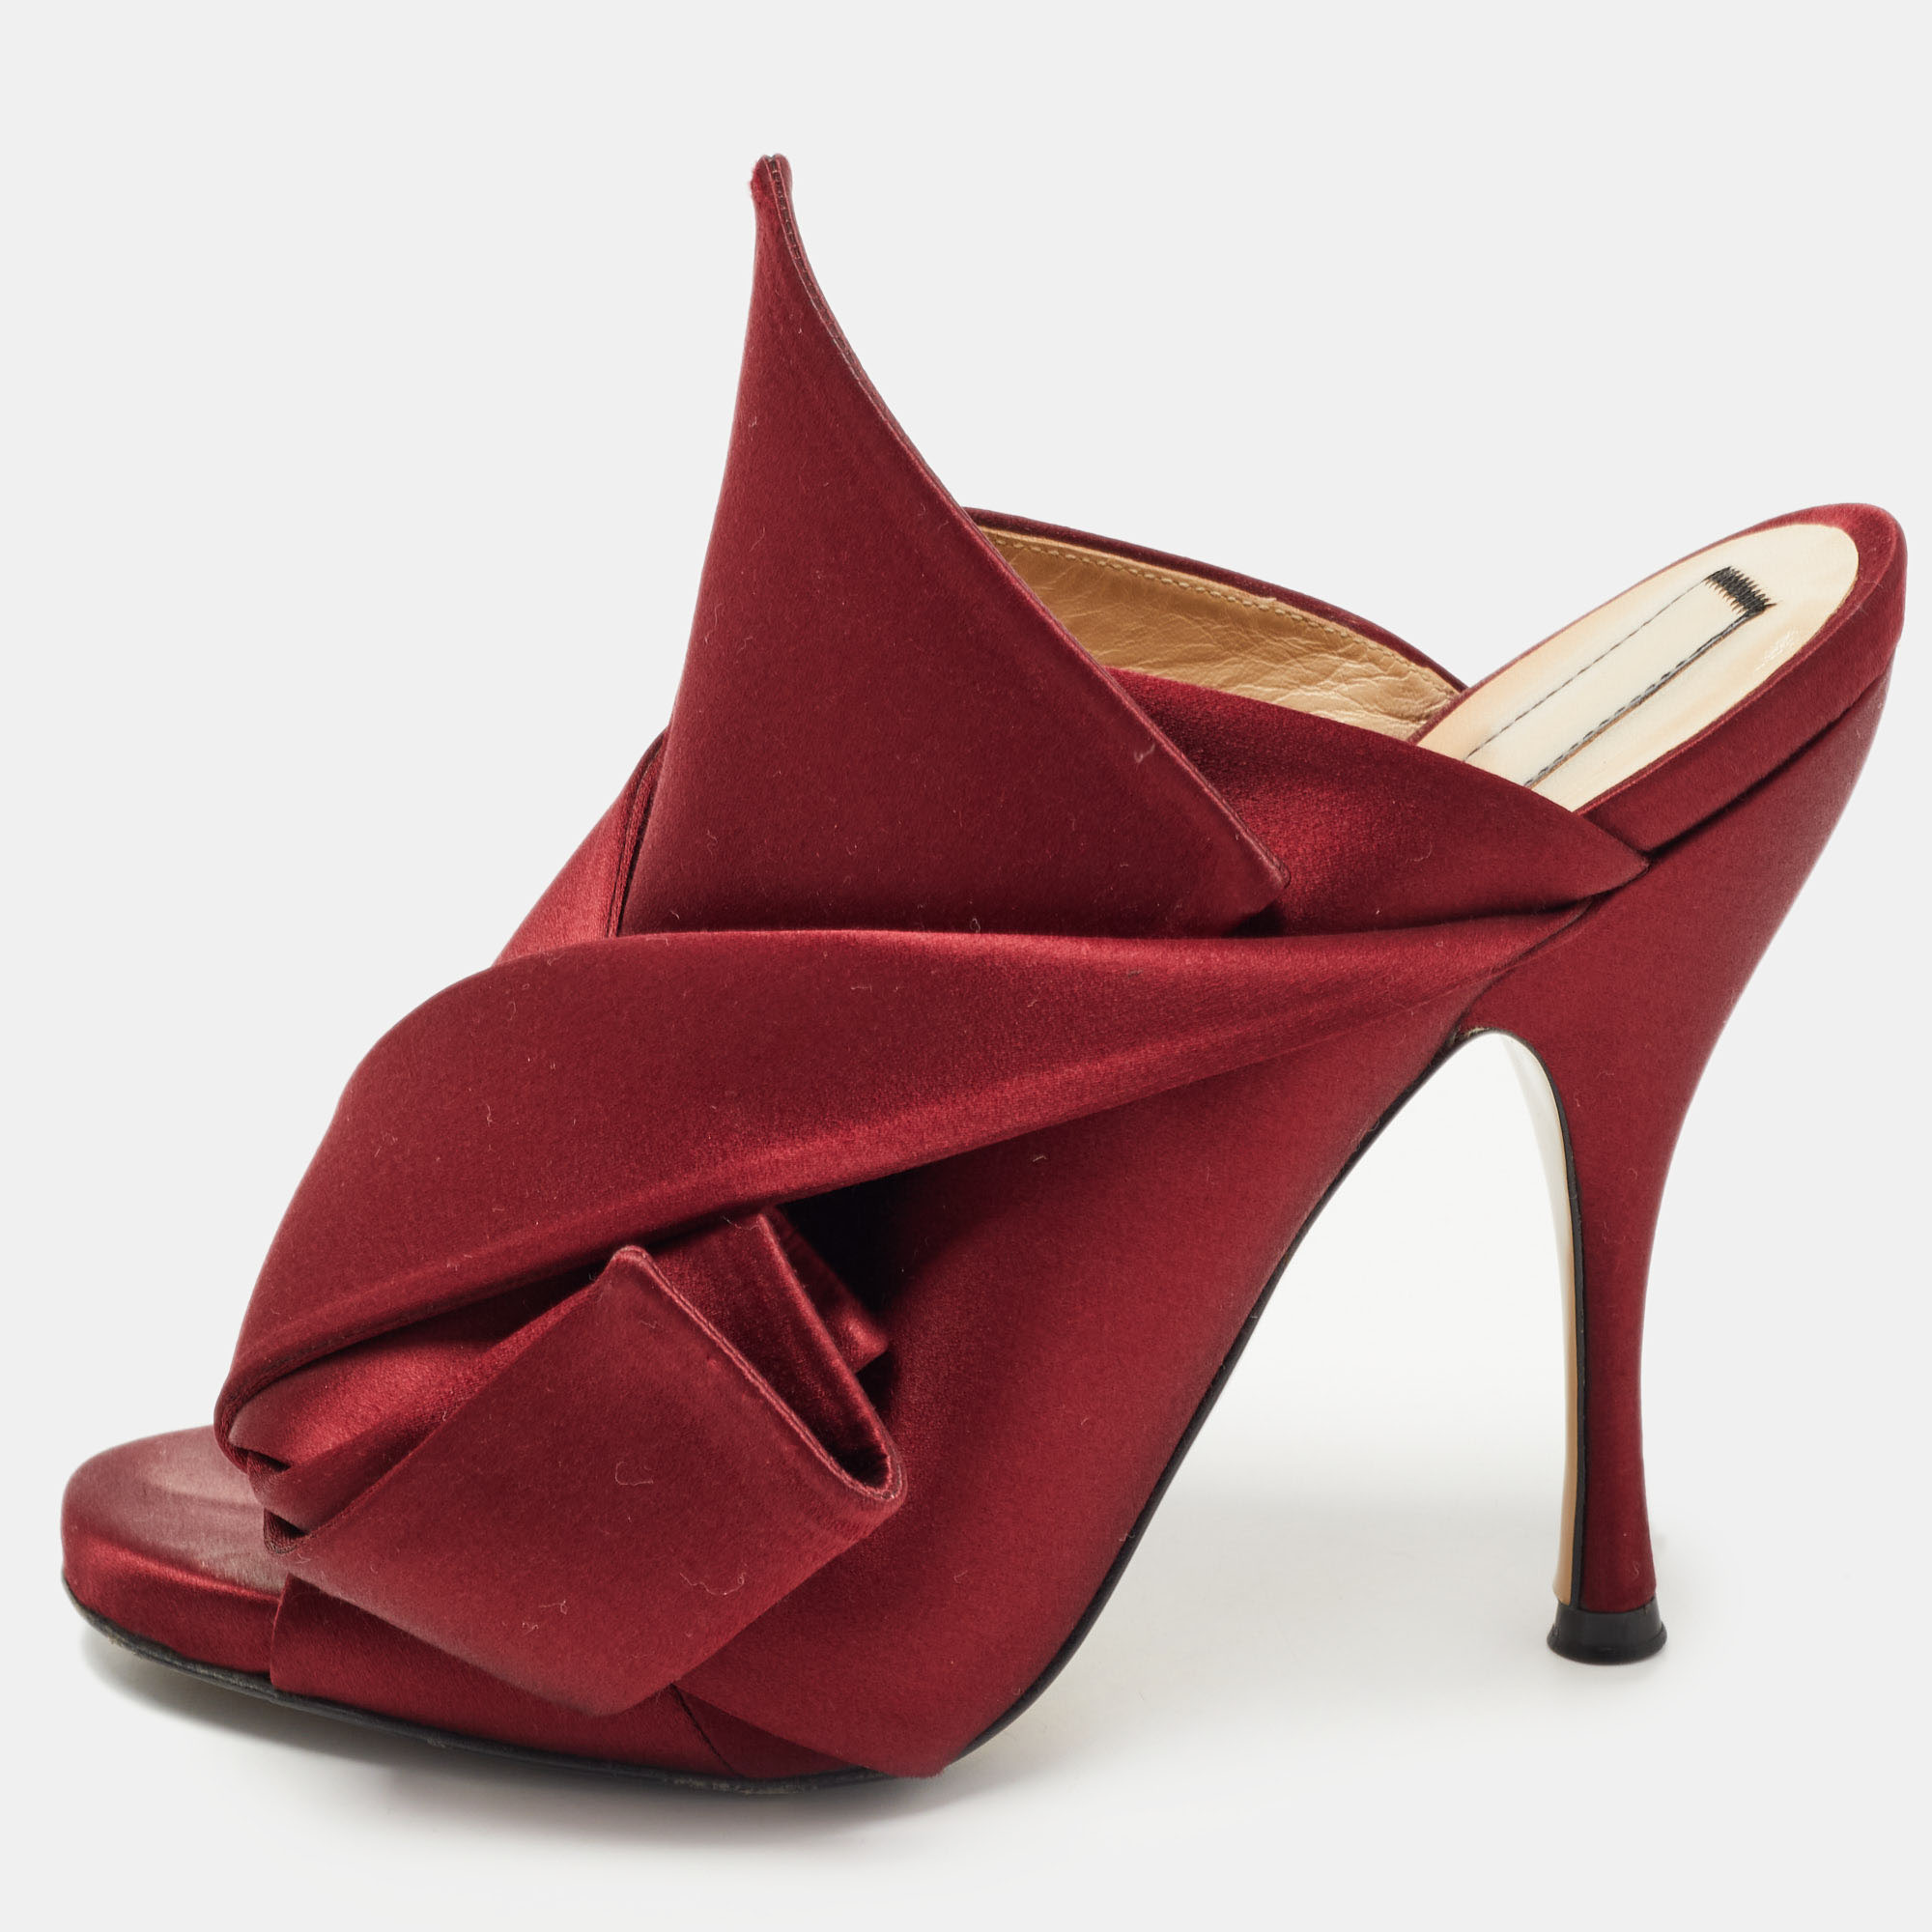 One look at this pair of N21 mules and our hearts skip a beat. These beautiful mules have been styled with perfection just so a diva like you can flaunt them. Burgundy in shade the pair has been designed with big knots on the satin uppers. Theyll look amazing with all your dresses this season.